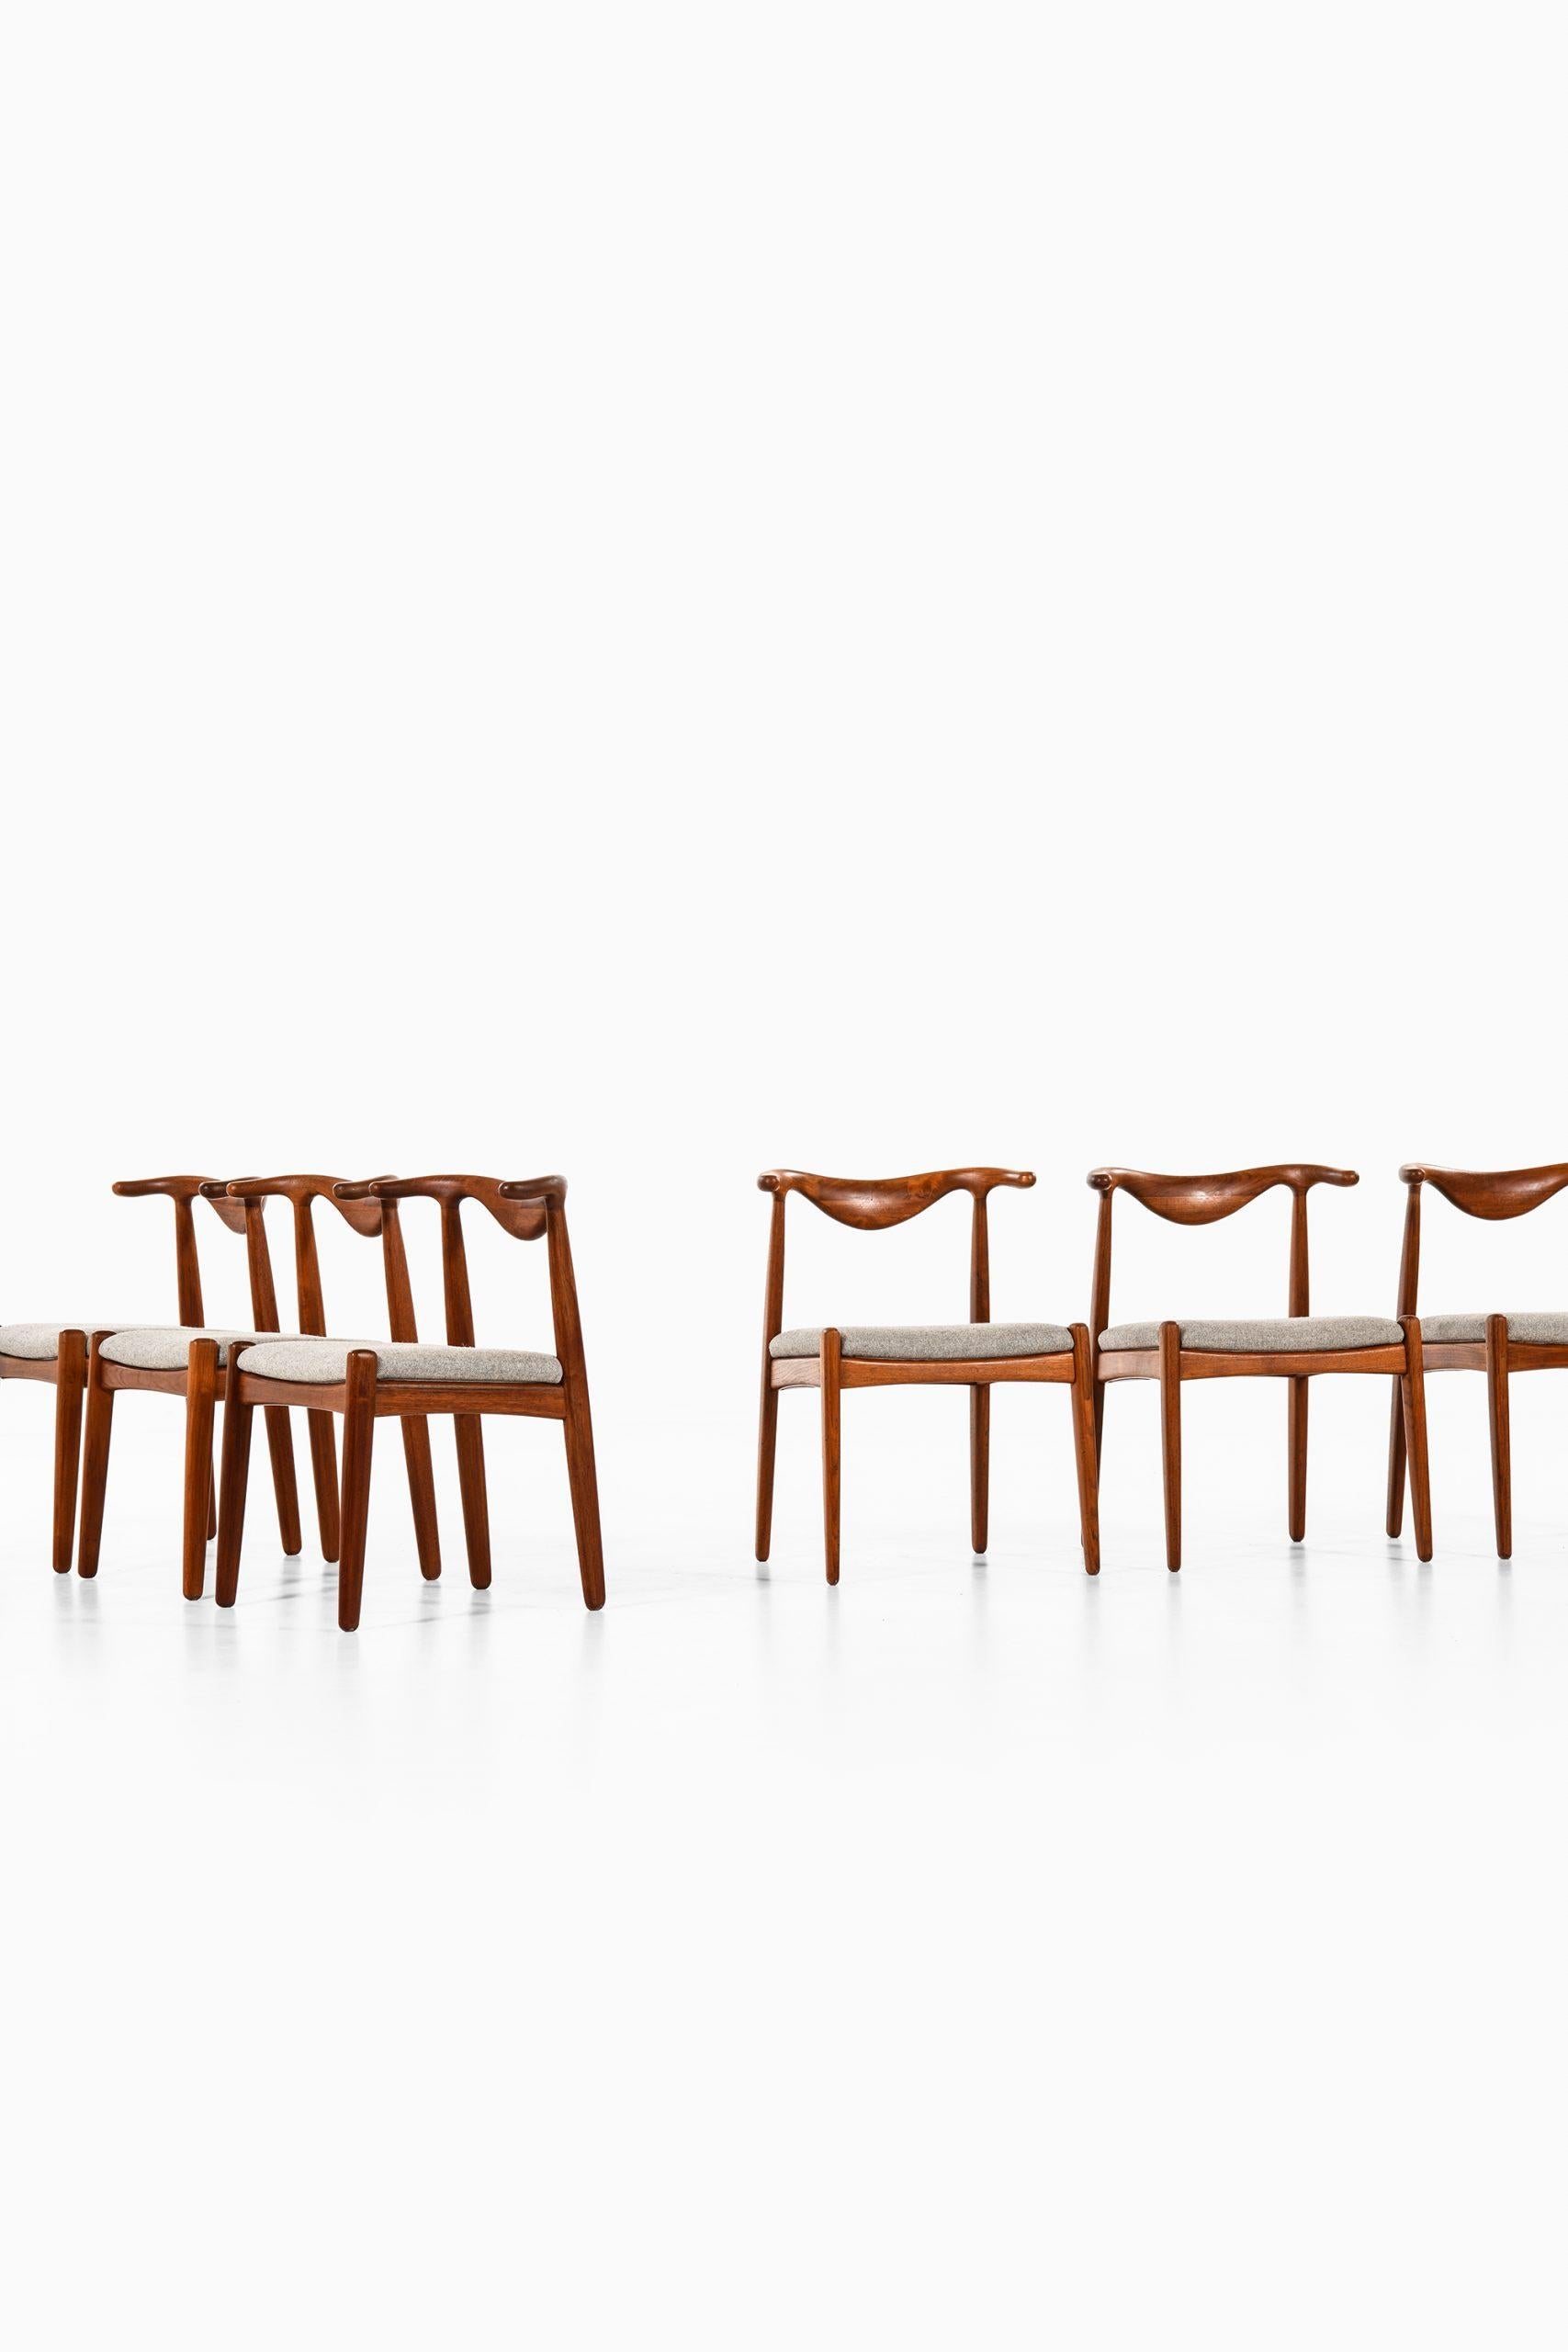 Rare set of 6 cowhorn dining chairs designed by Svend Aage Madsen. Produced by K. Knudsen in Denmark.